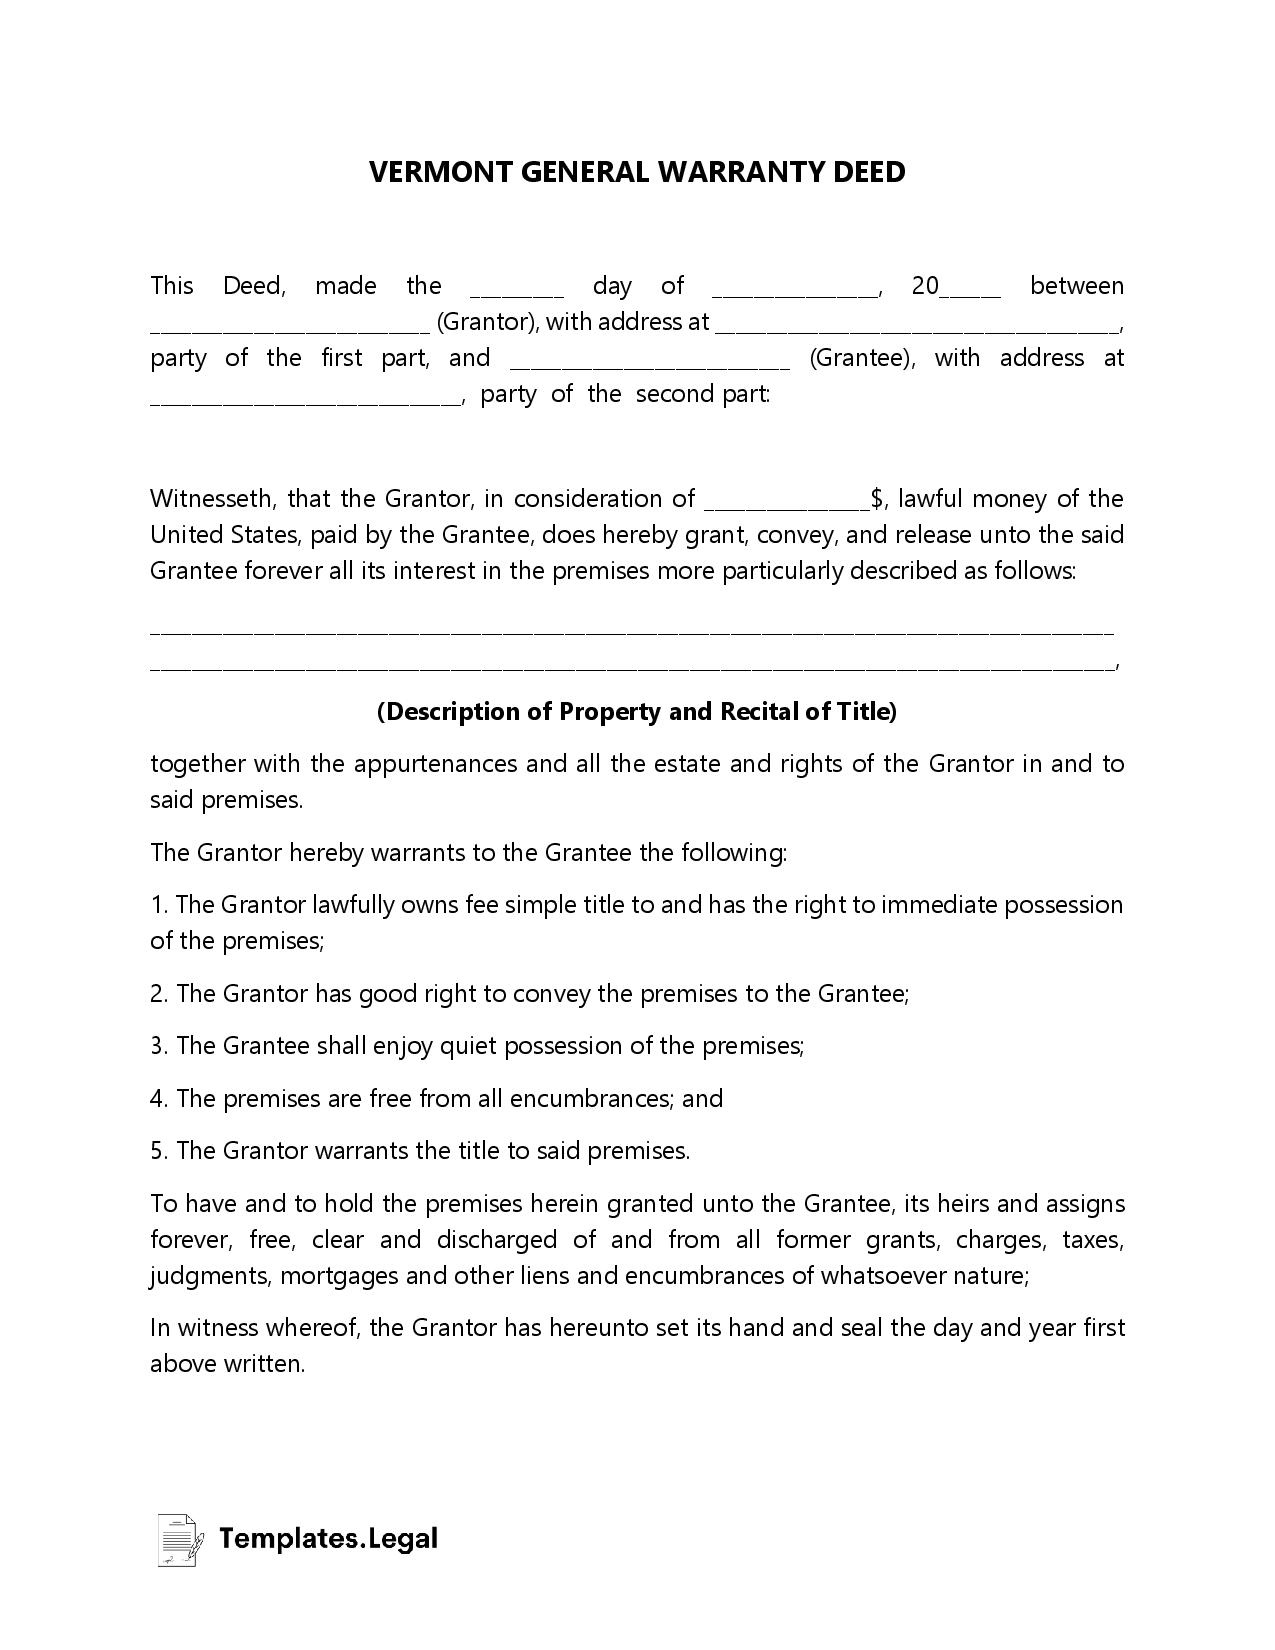 Vermont General Warranty Deed - Templates.Legal